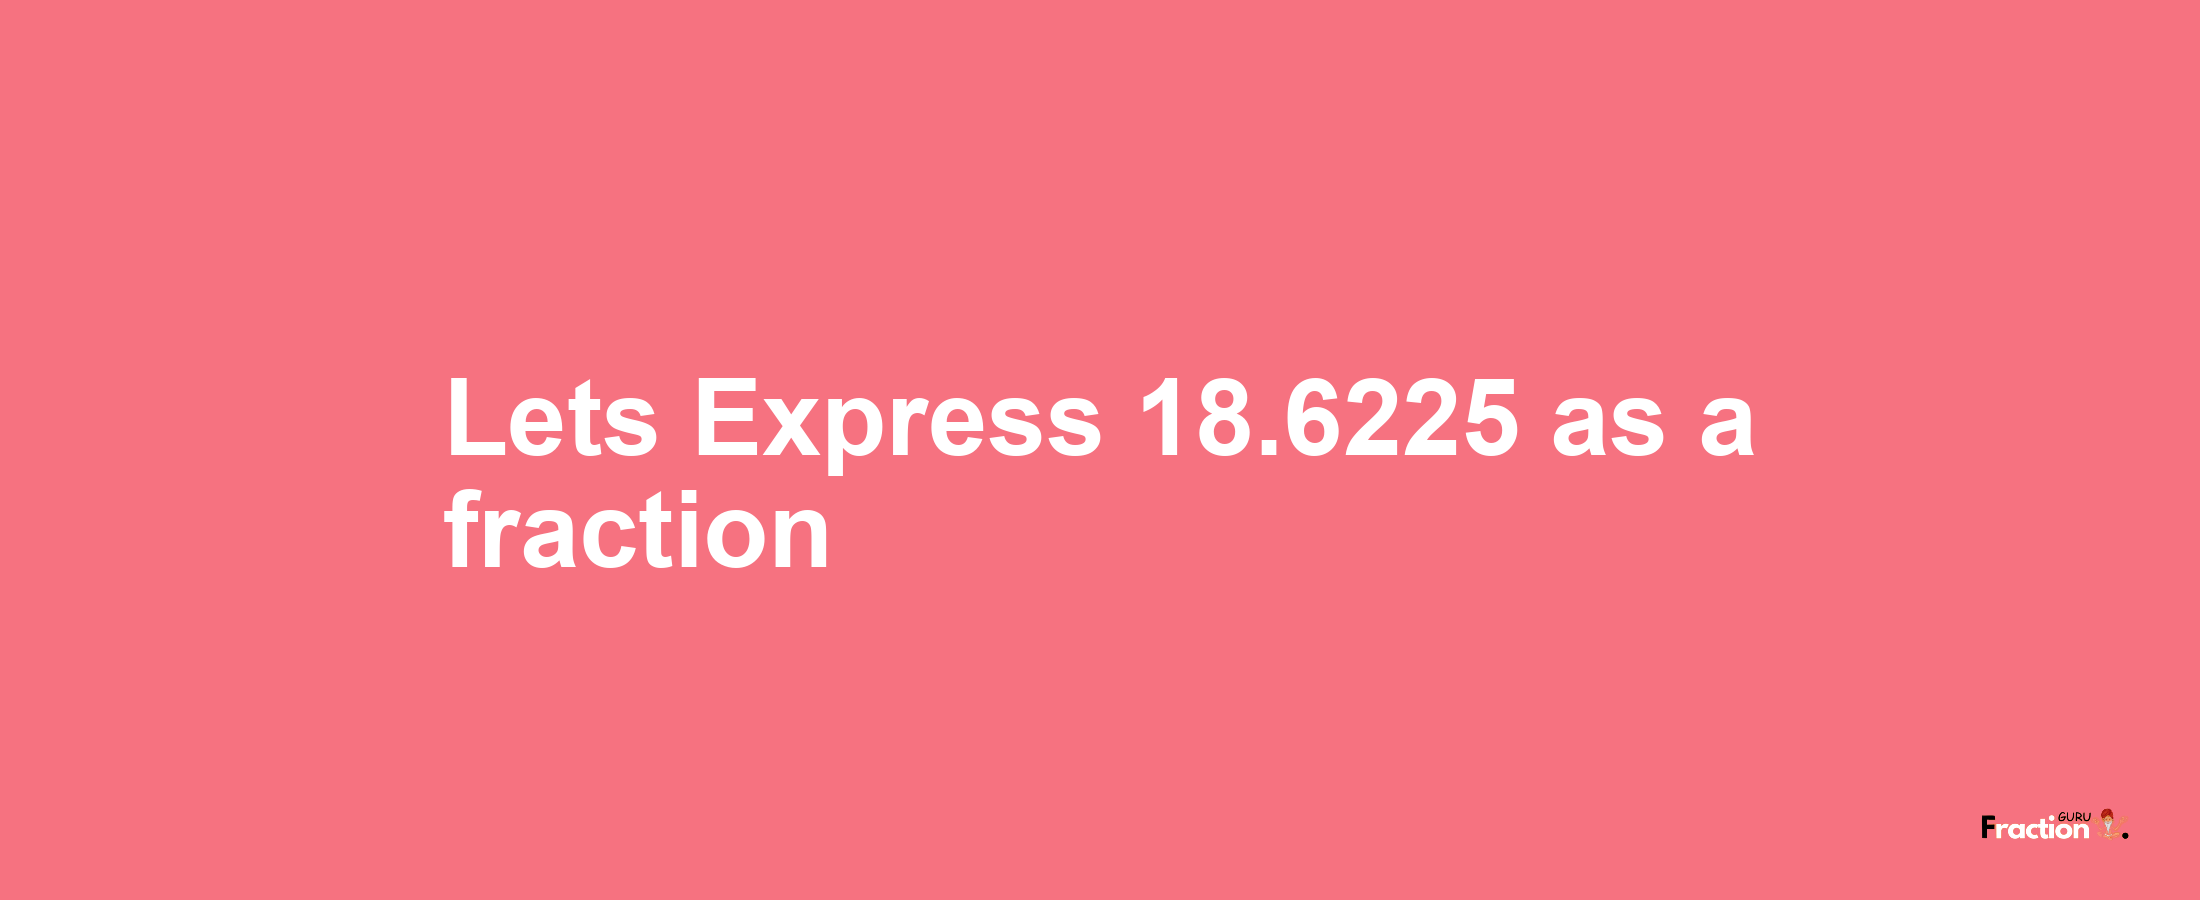 Lets Express 18.6225 as afraction